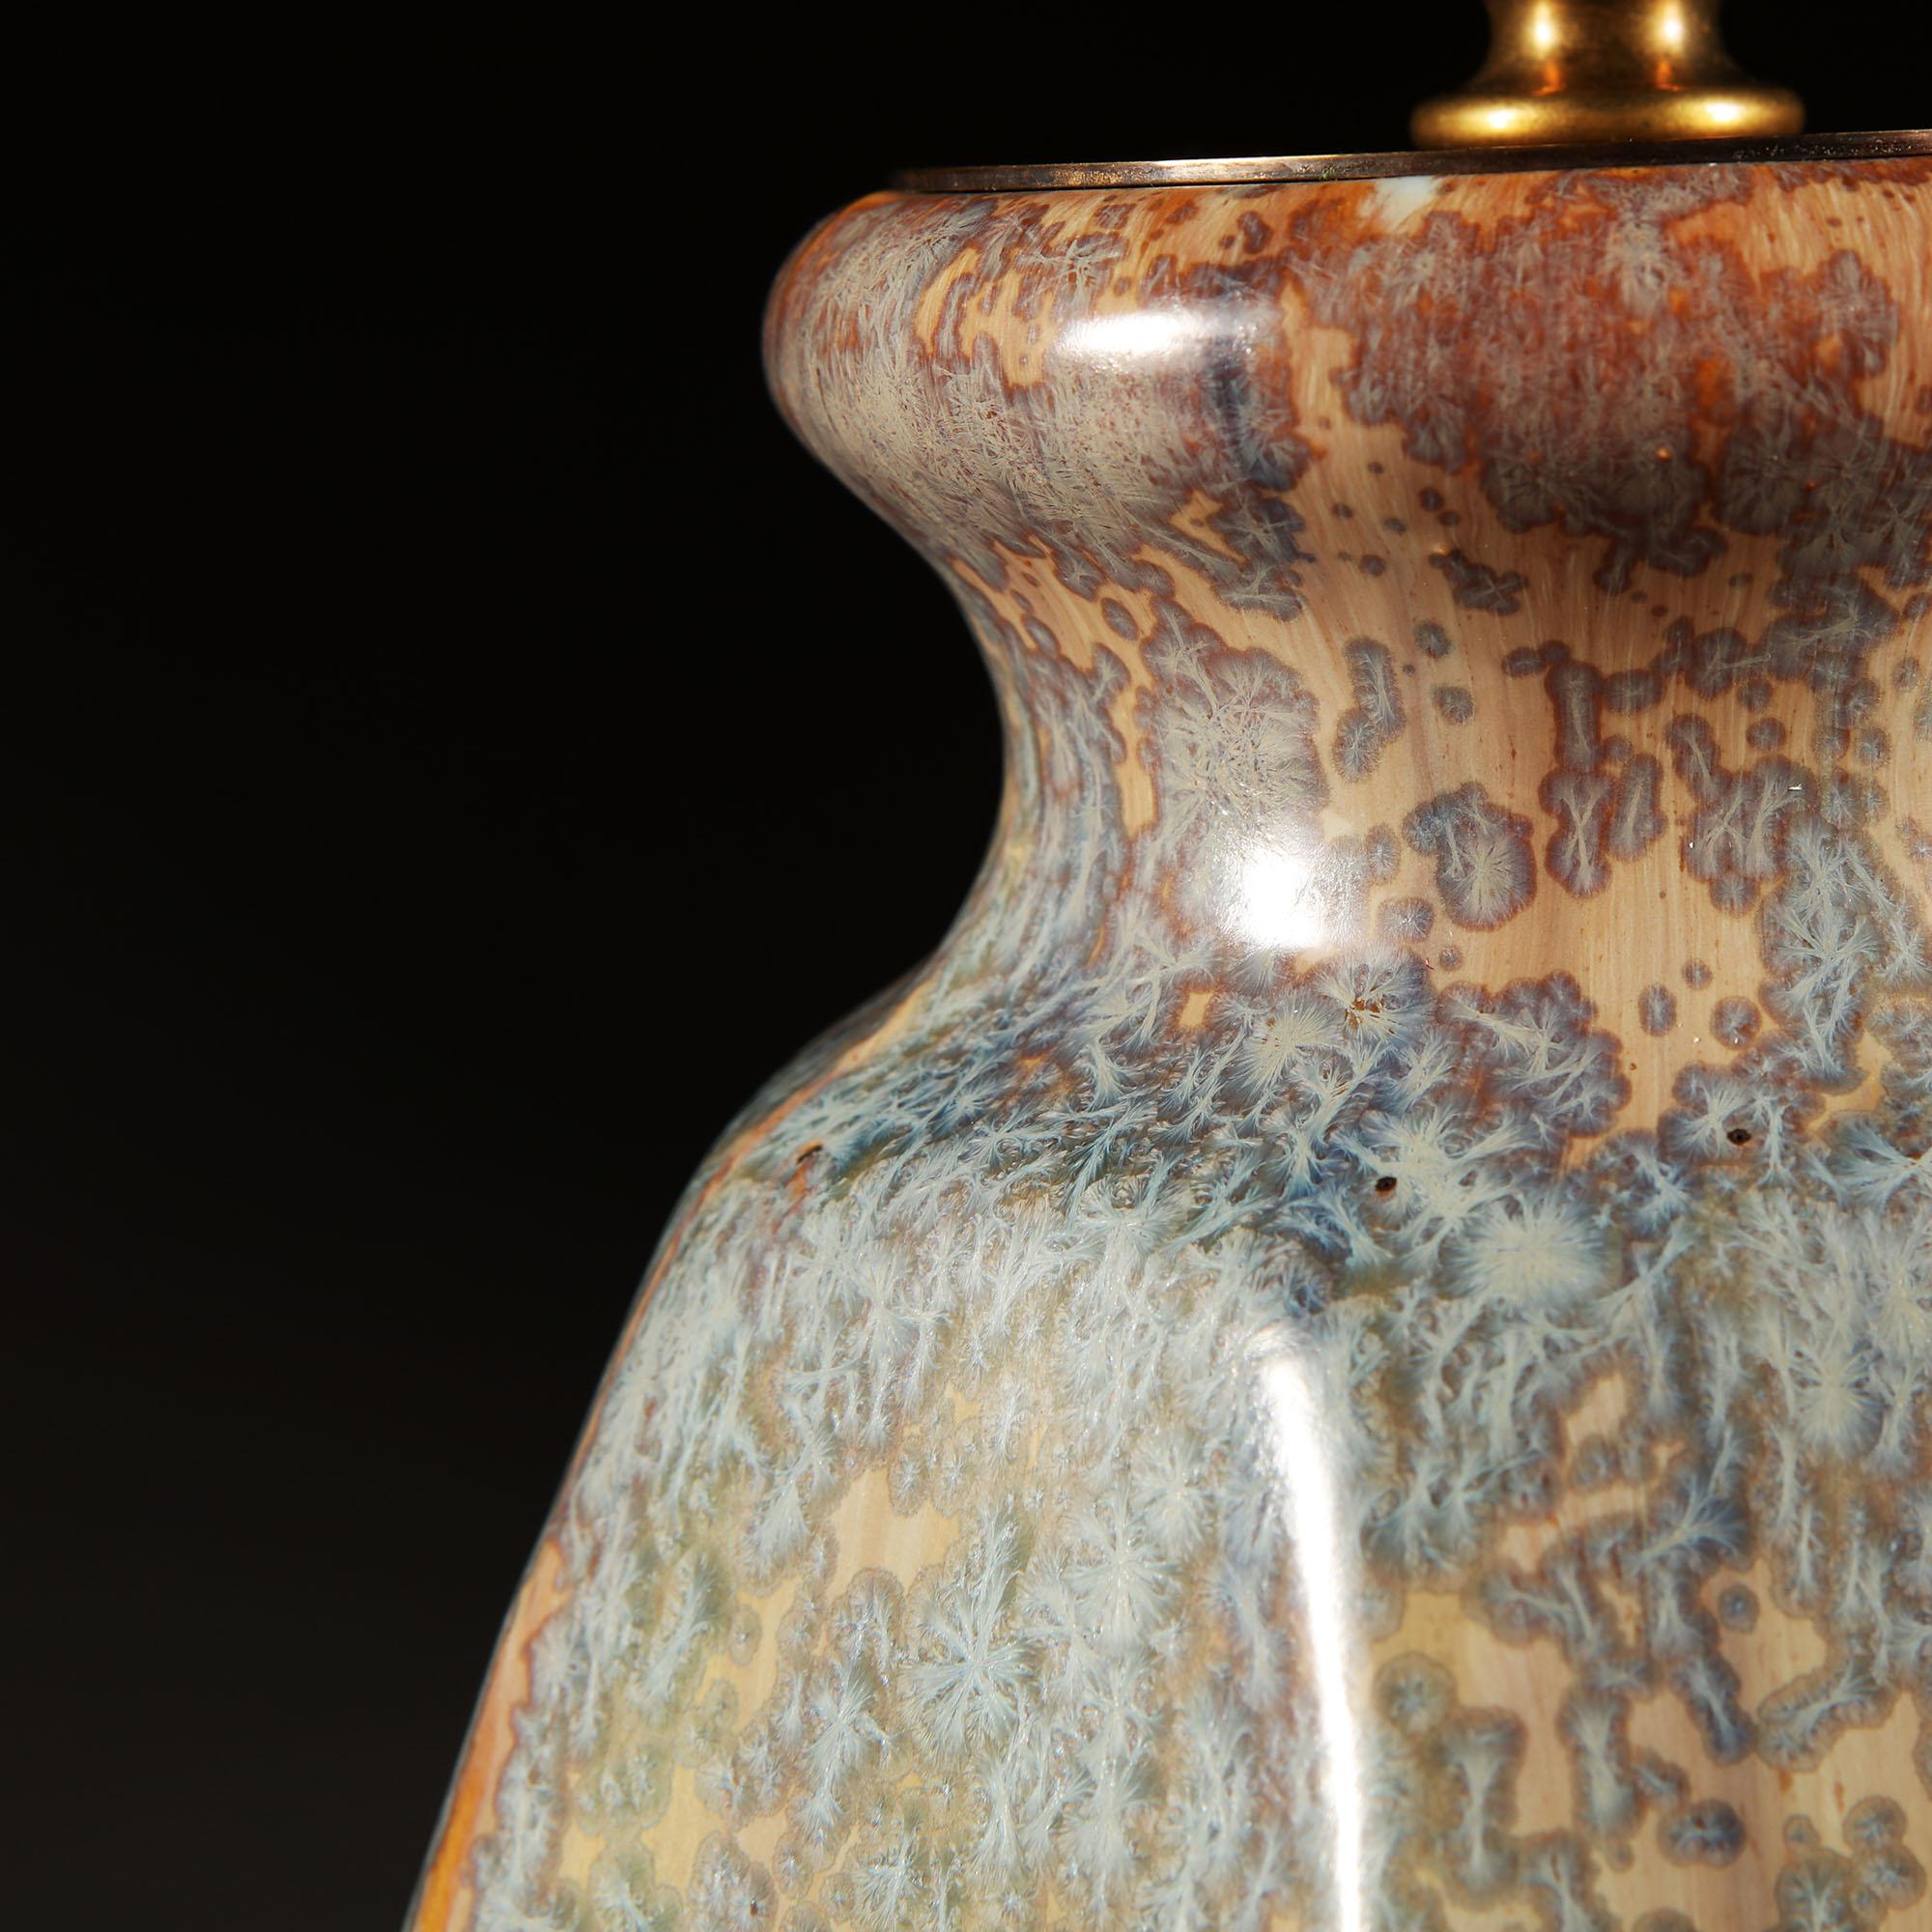 19th Century Pair of Pierrefonds Pottery Vases as Table Lamps with Blue Crystalline Glaze